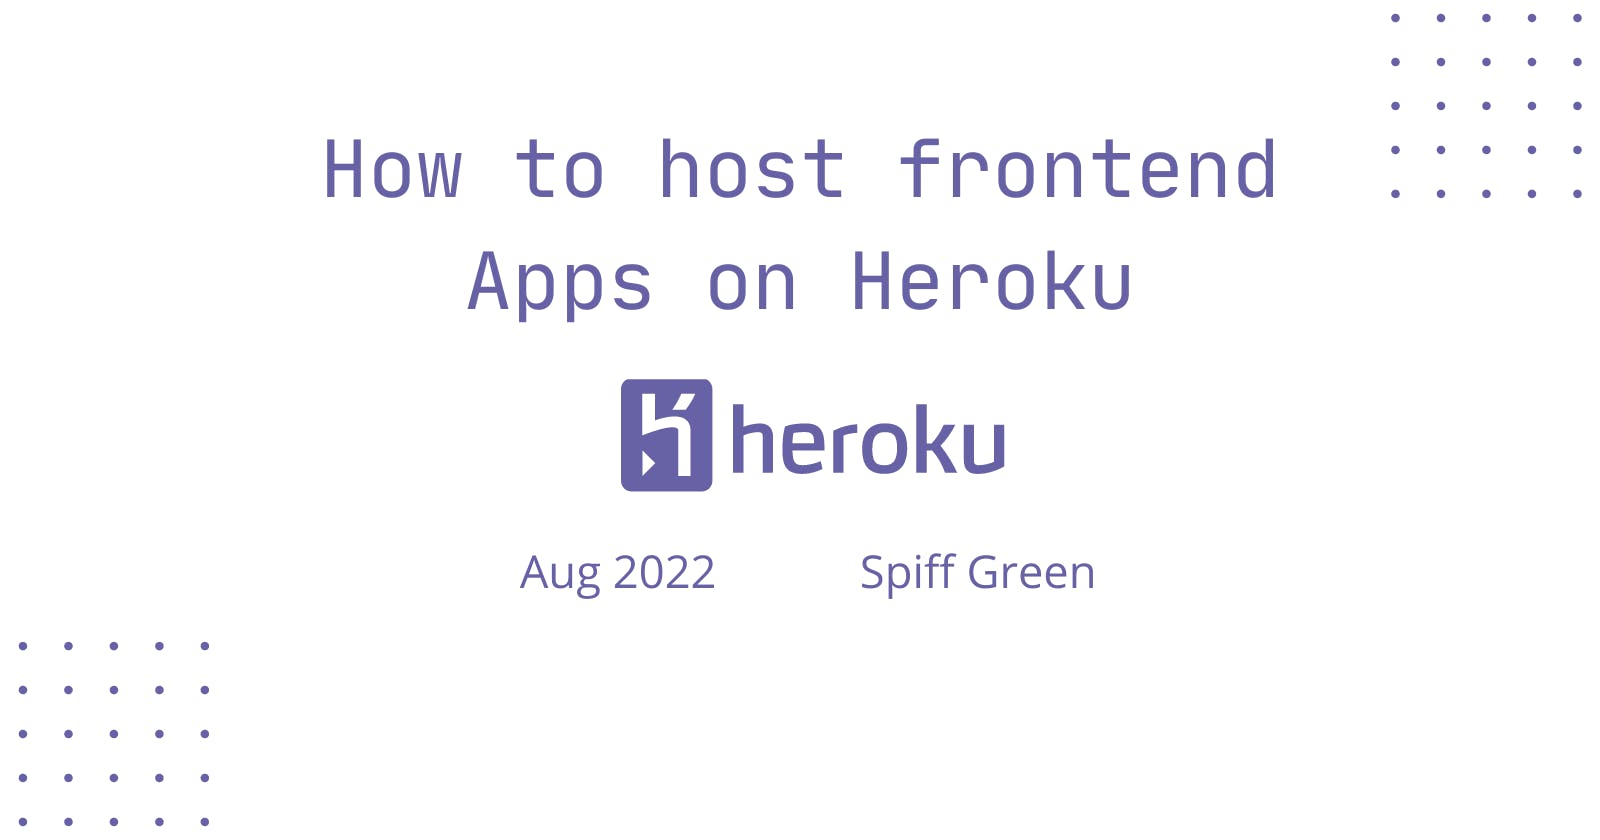 How to host frontend apps on Heroku